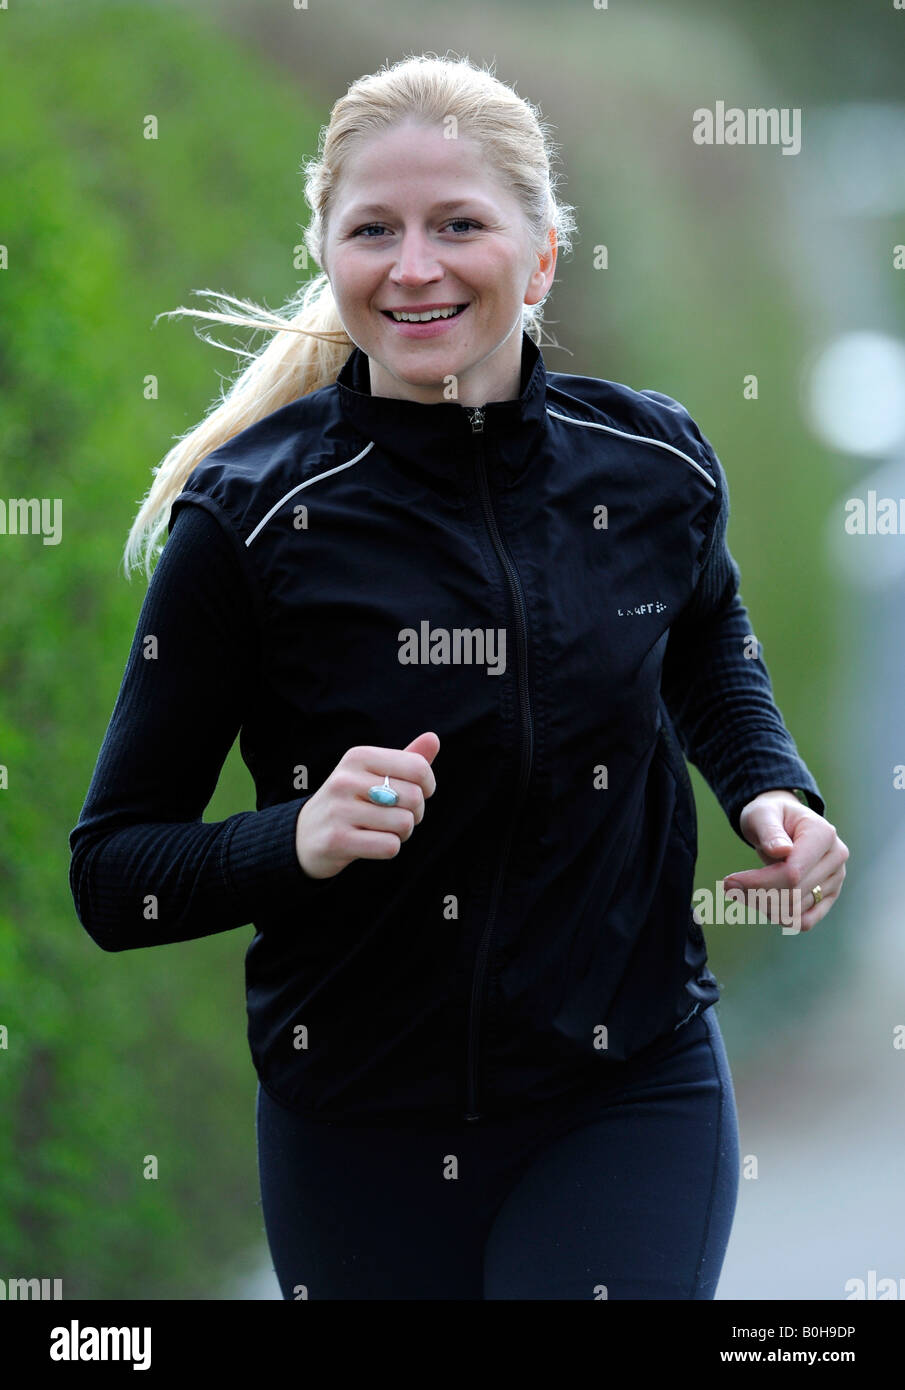 Young, smiling blonde woman wearing black tracksuit jogging Stock Photo